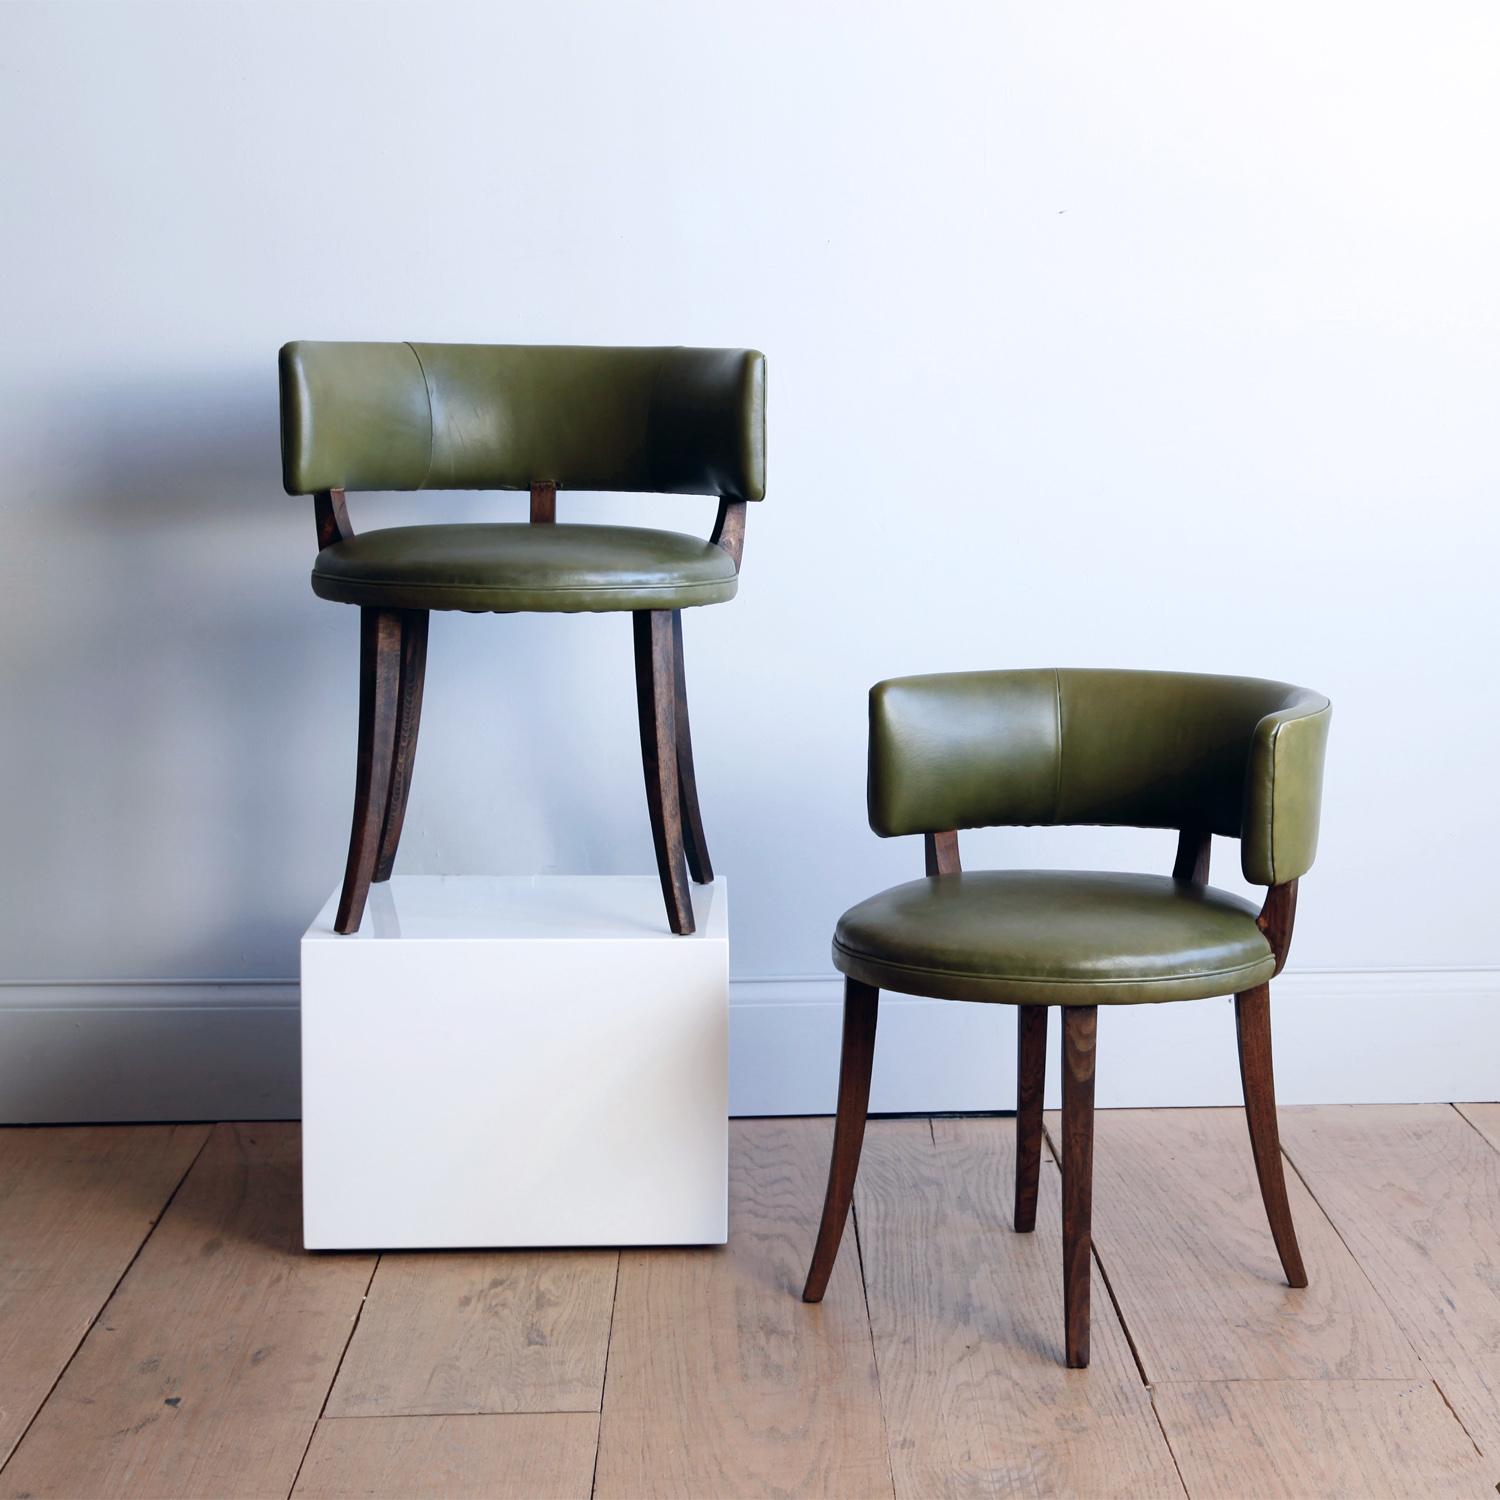 Literature: Sotheby’s: Important 20th century design (June 2014), lot no.90.

A pair of graceful side chairs with low, curved backs. Covered in gently worn green leather.

